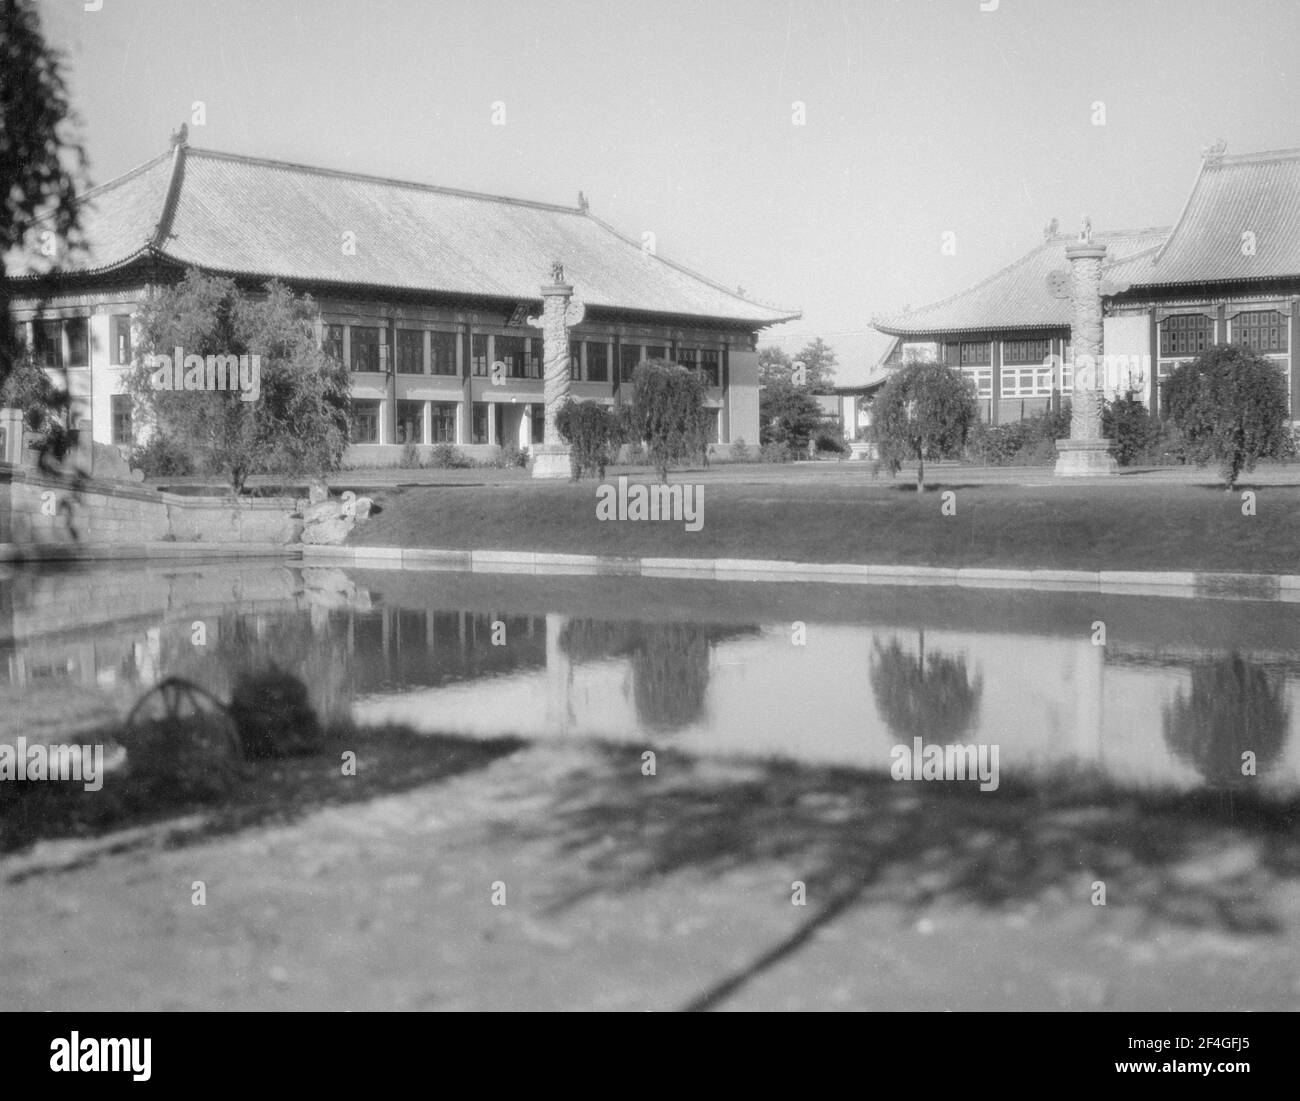 Building with reflection in water, China, Beijing (China), Yanjing da xue, 1931. From the Sidney D. Gamble photographs collection. () Stock Photo